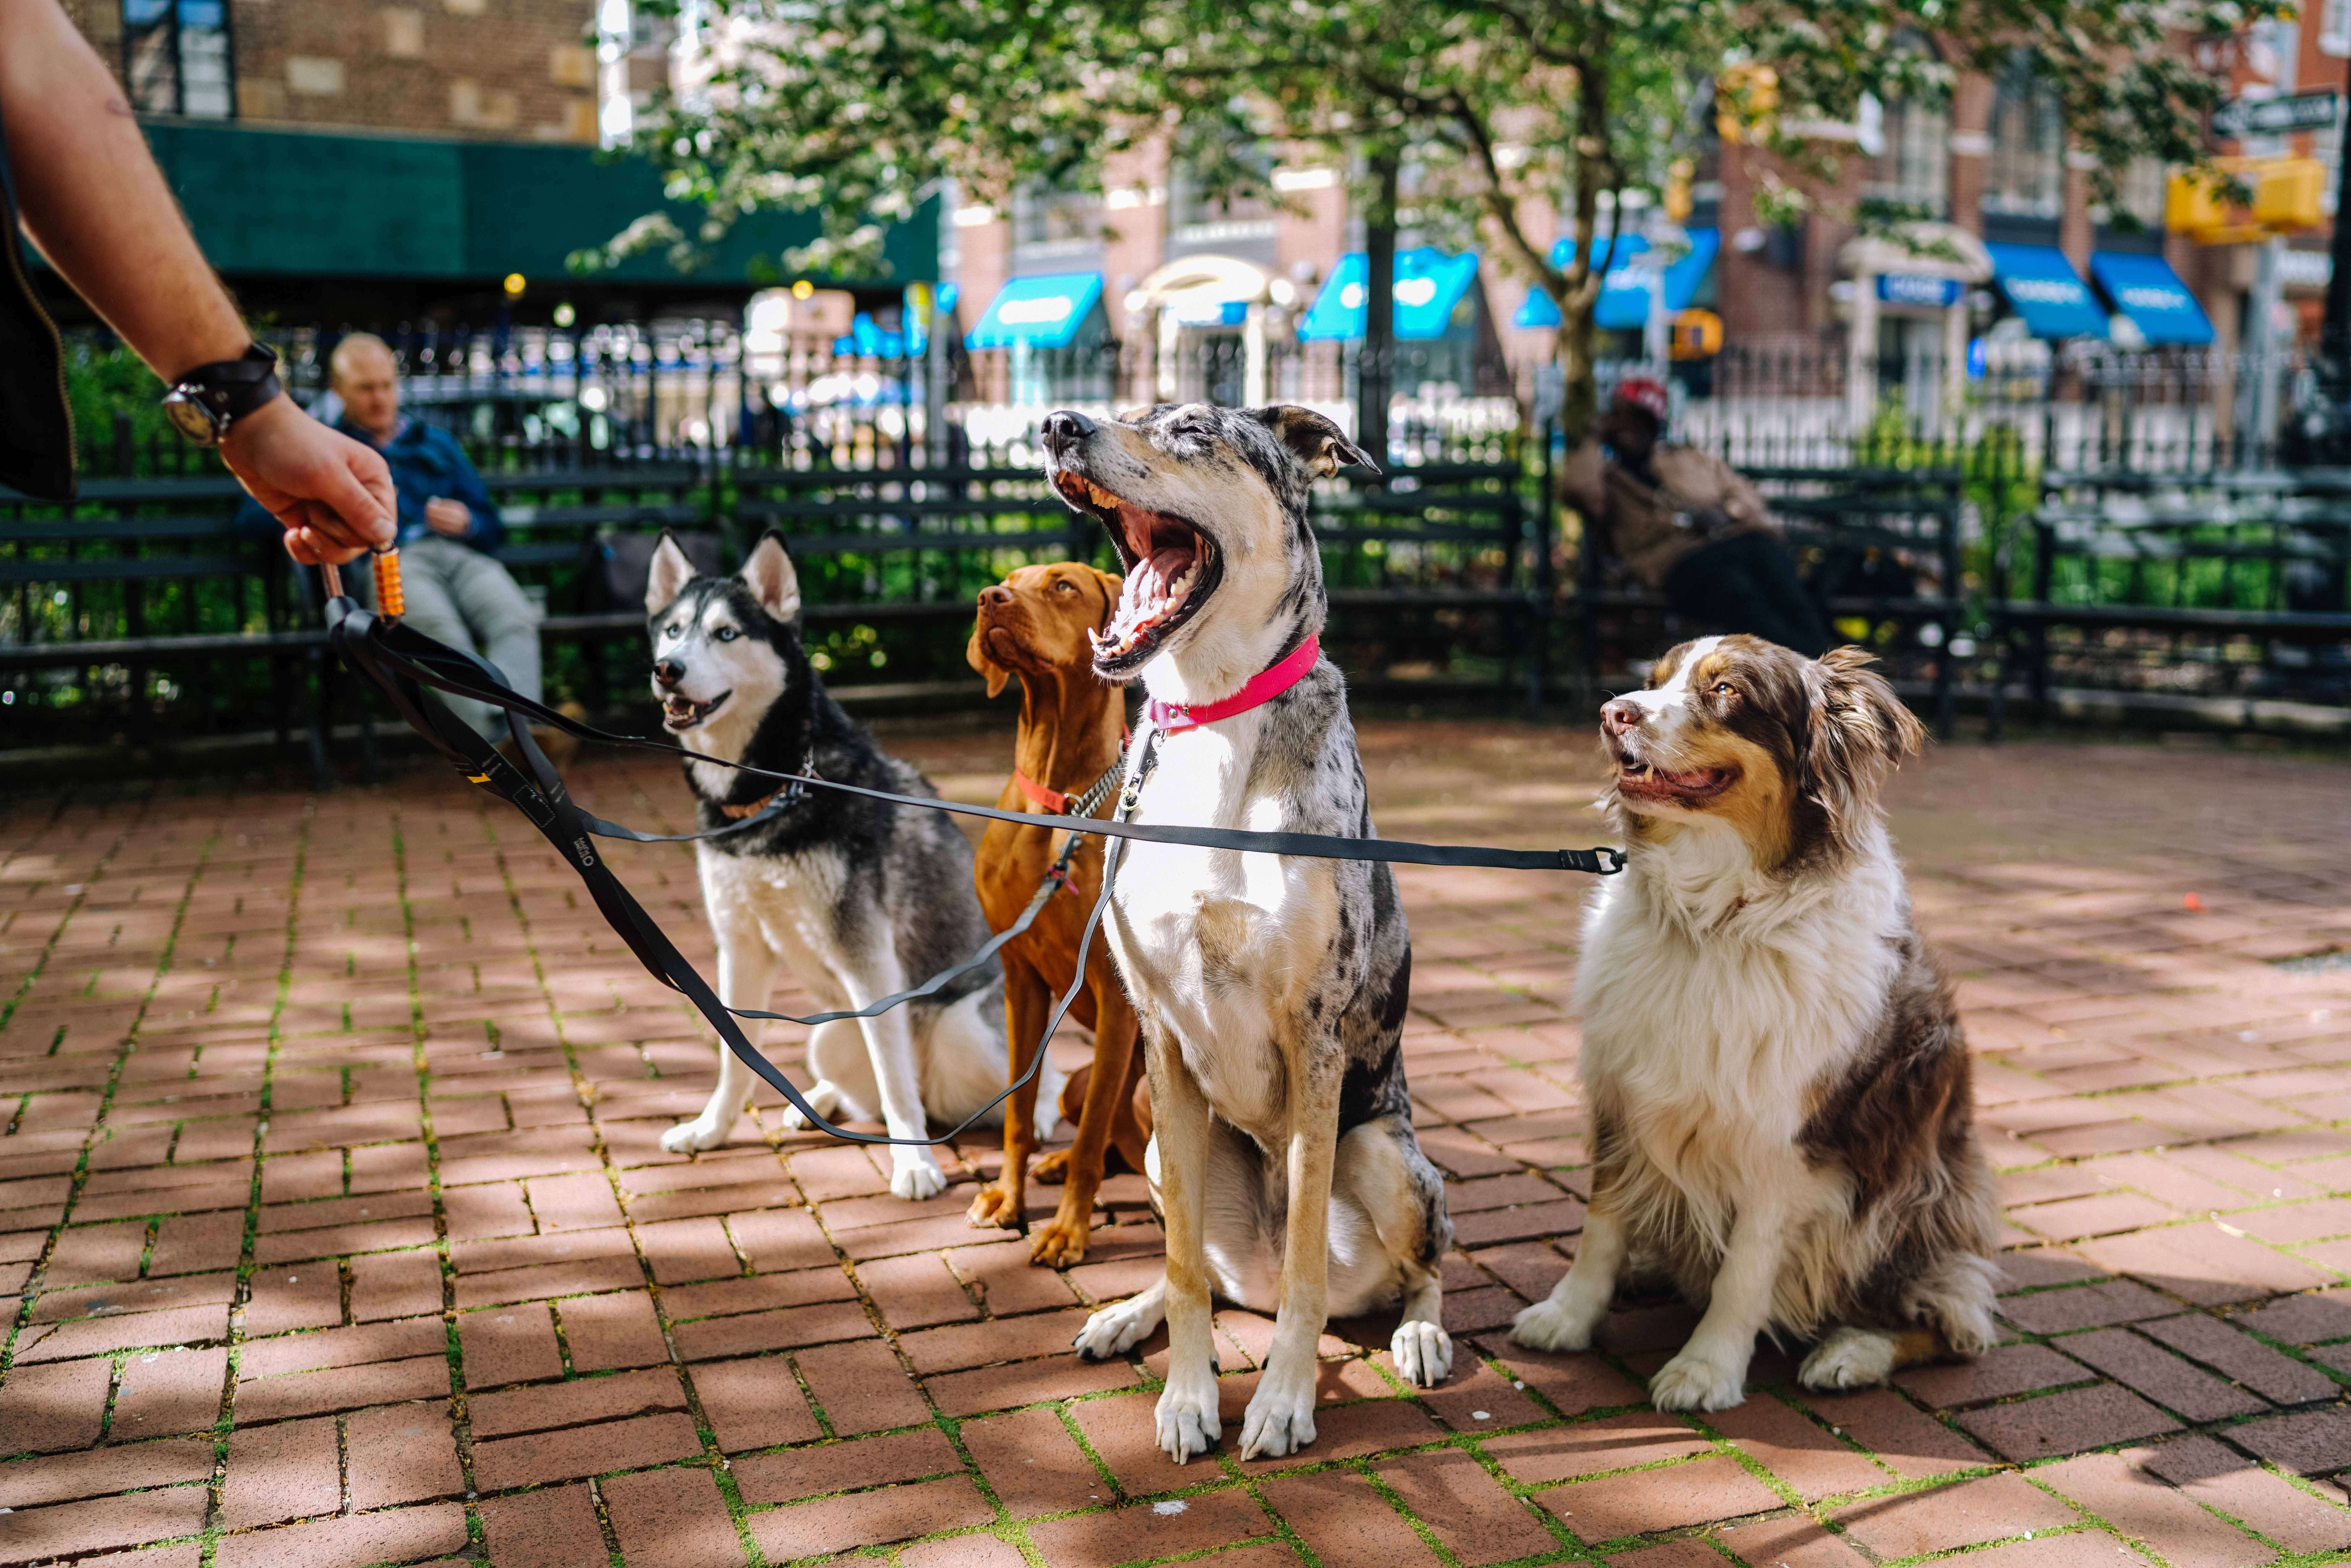 Four medium-sized dogs of different breeds on leashes that are attached to a carabiner in one person's hand